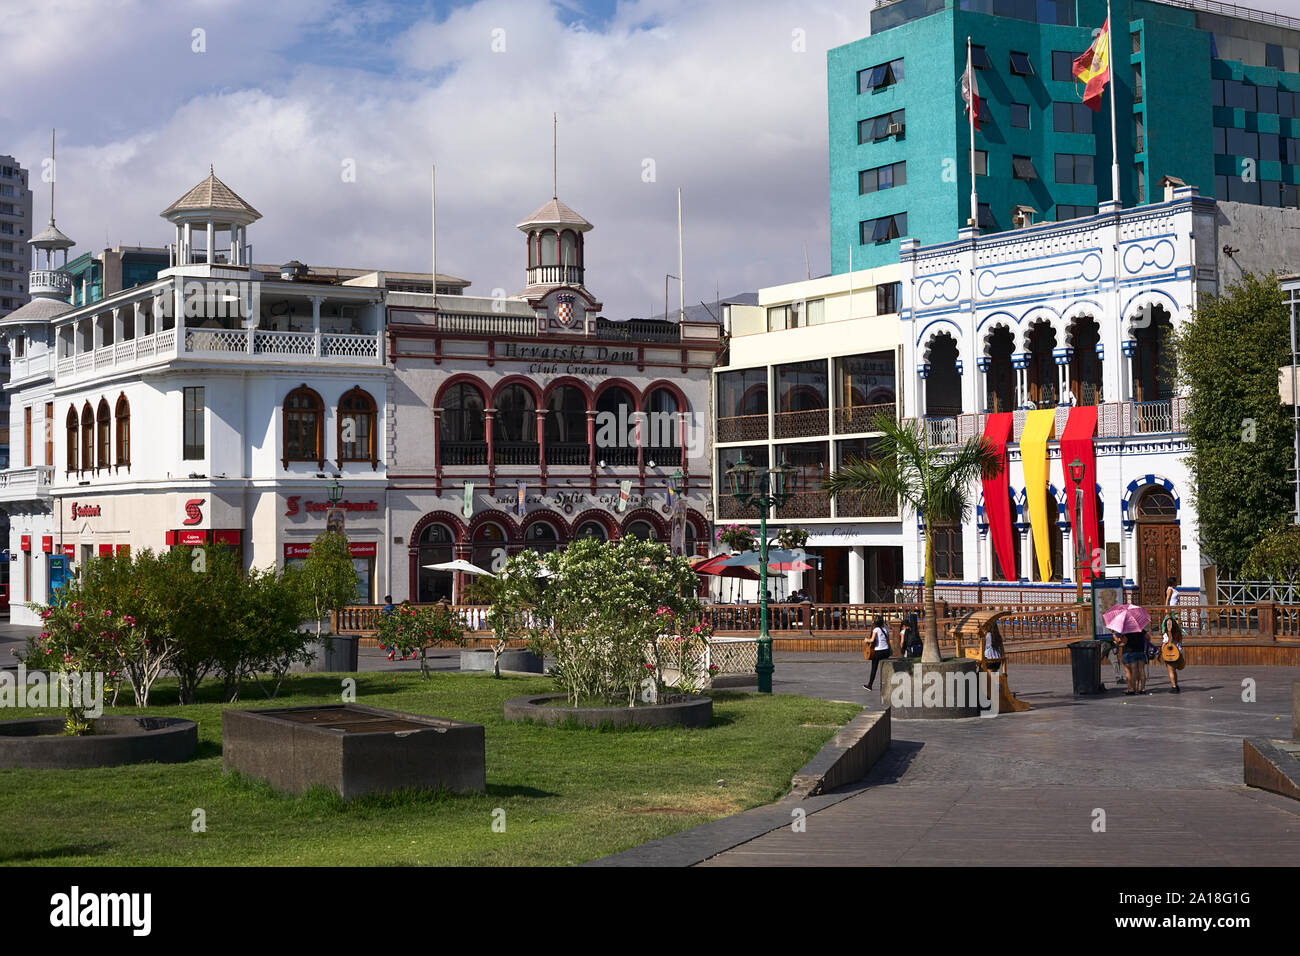 IQUIQUE, CHILE - JANUARY 22, 2015: Unidentified people on Plaza Prat main square in Iquique, Chile Stock Photo